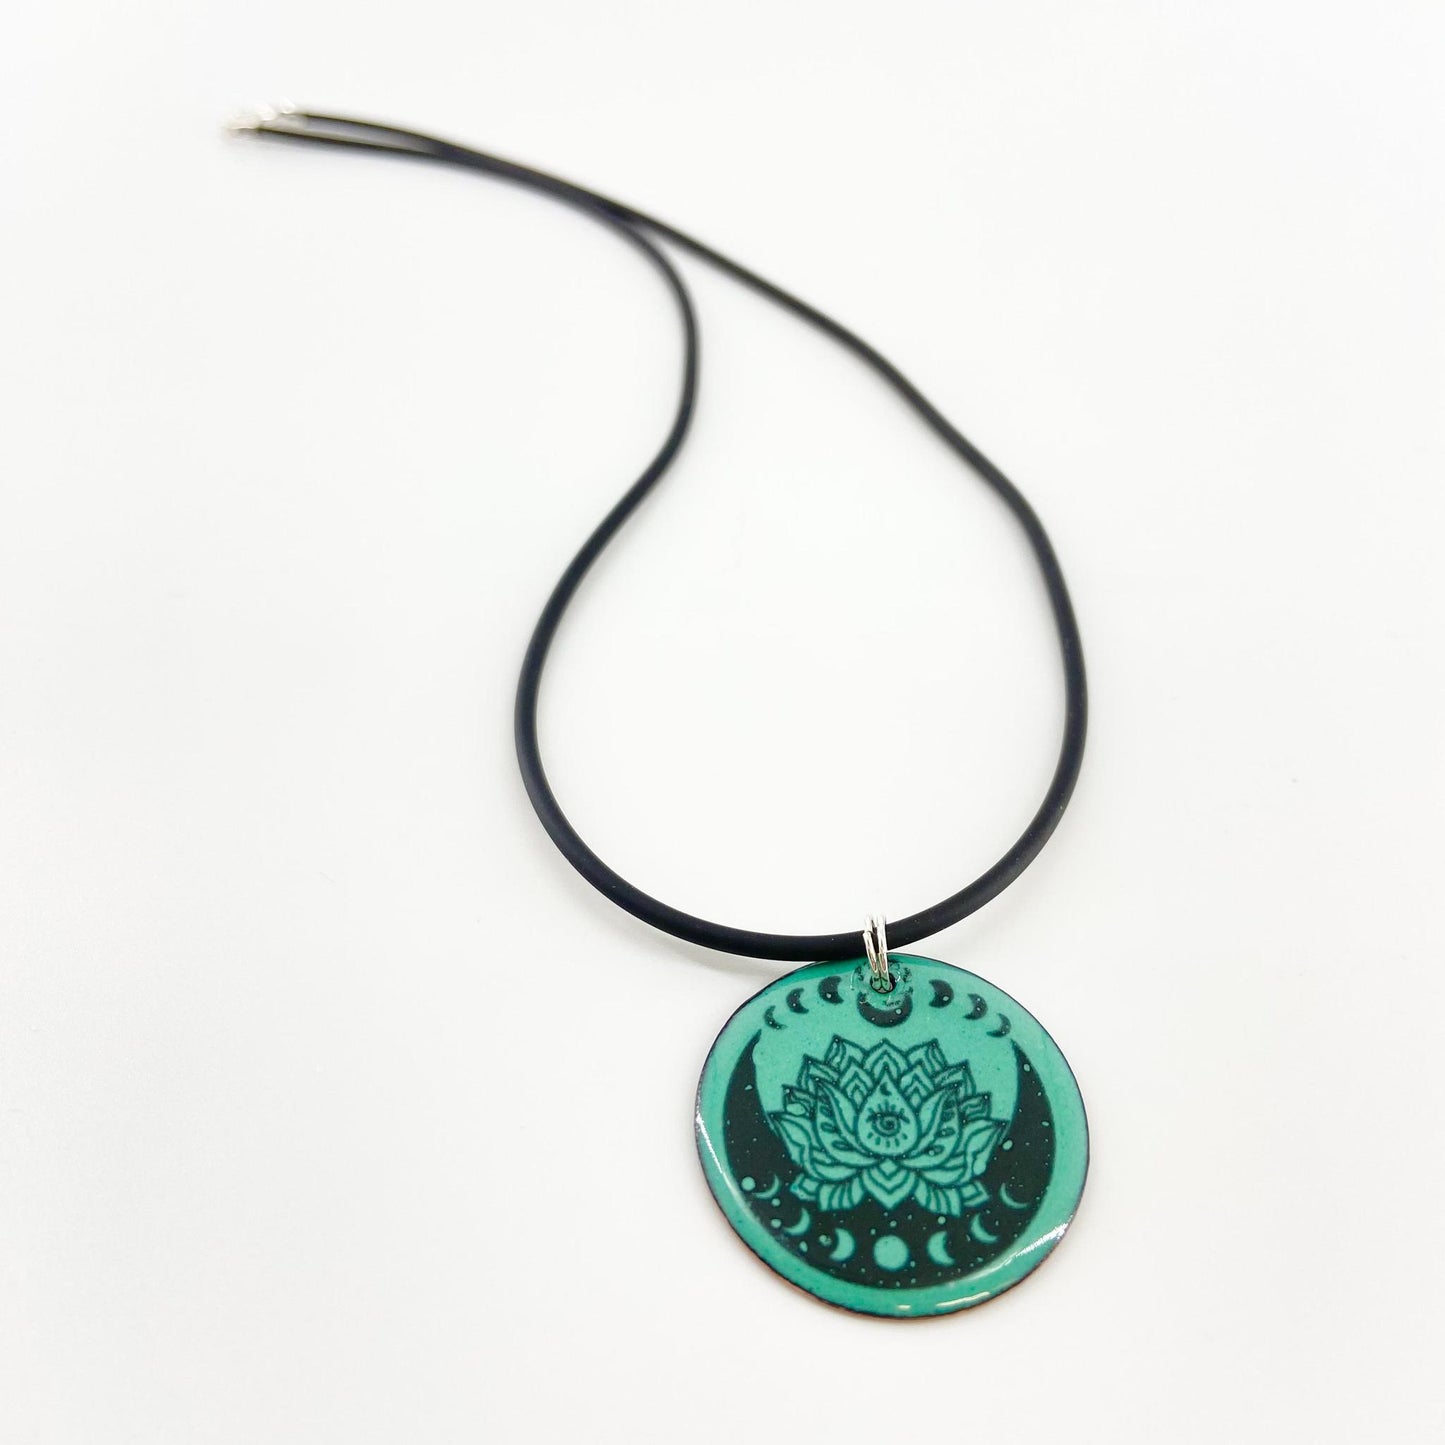 Necklace - Lotus and Moon Phases on Turquoise - Enamel on Copper